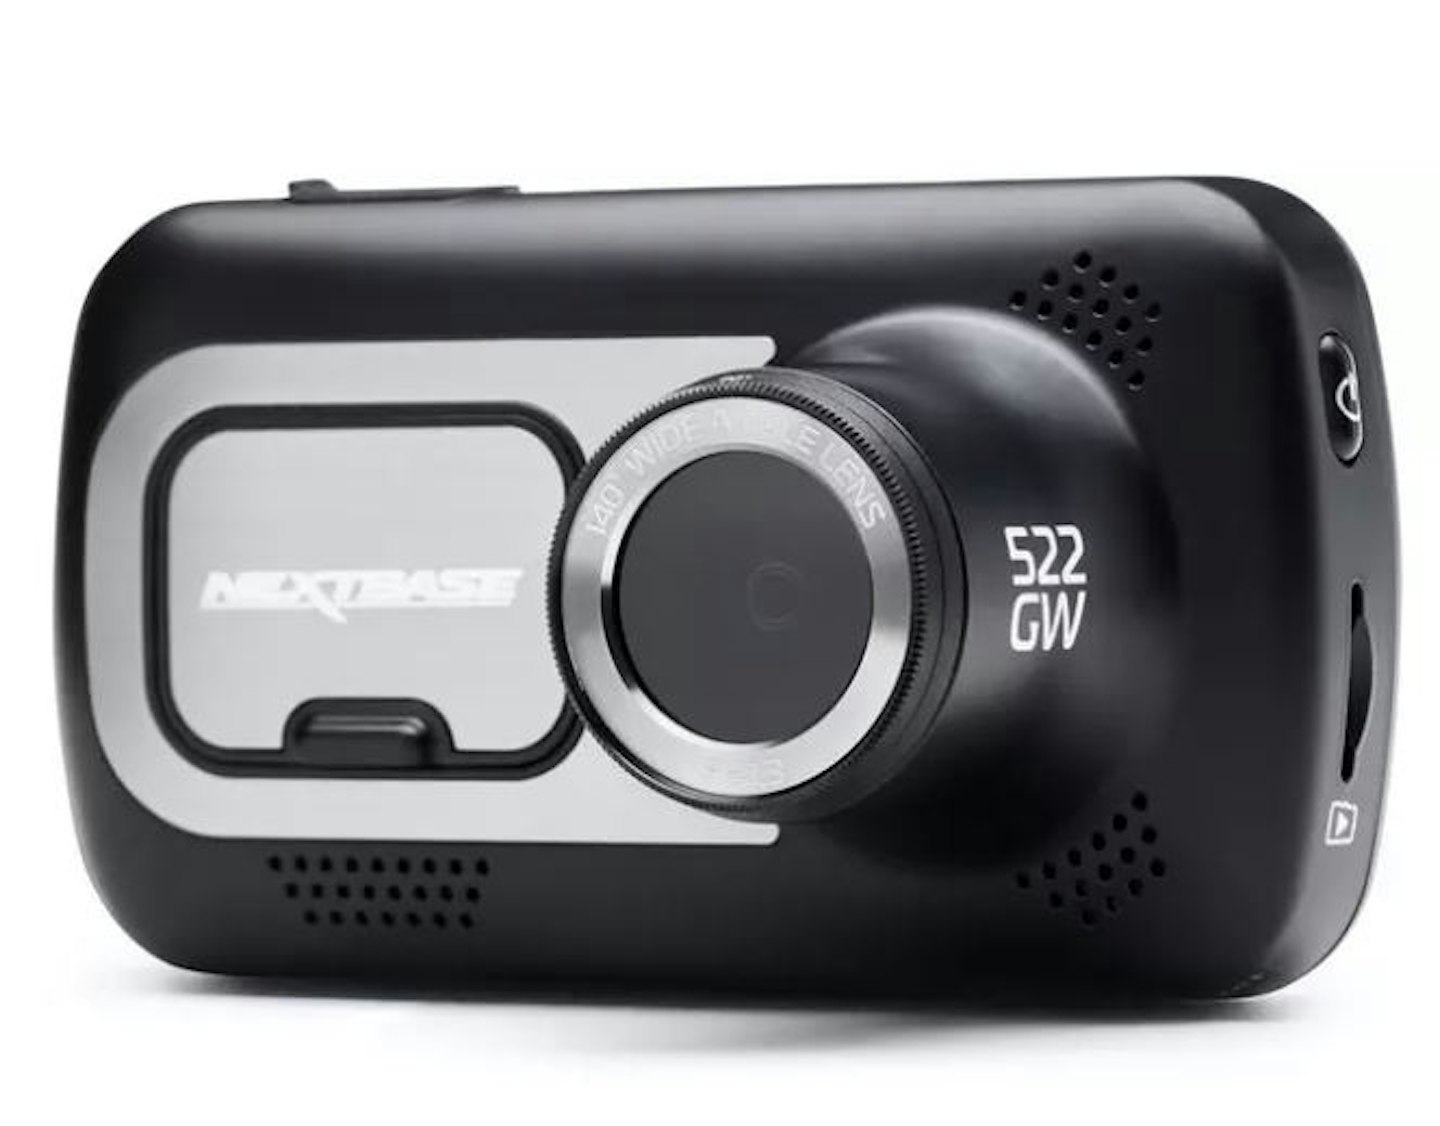 Nextbase 622GW Dash Cam, from £234.95 (Today)